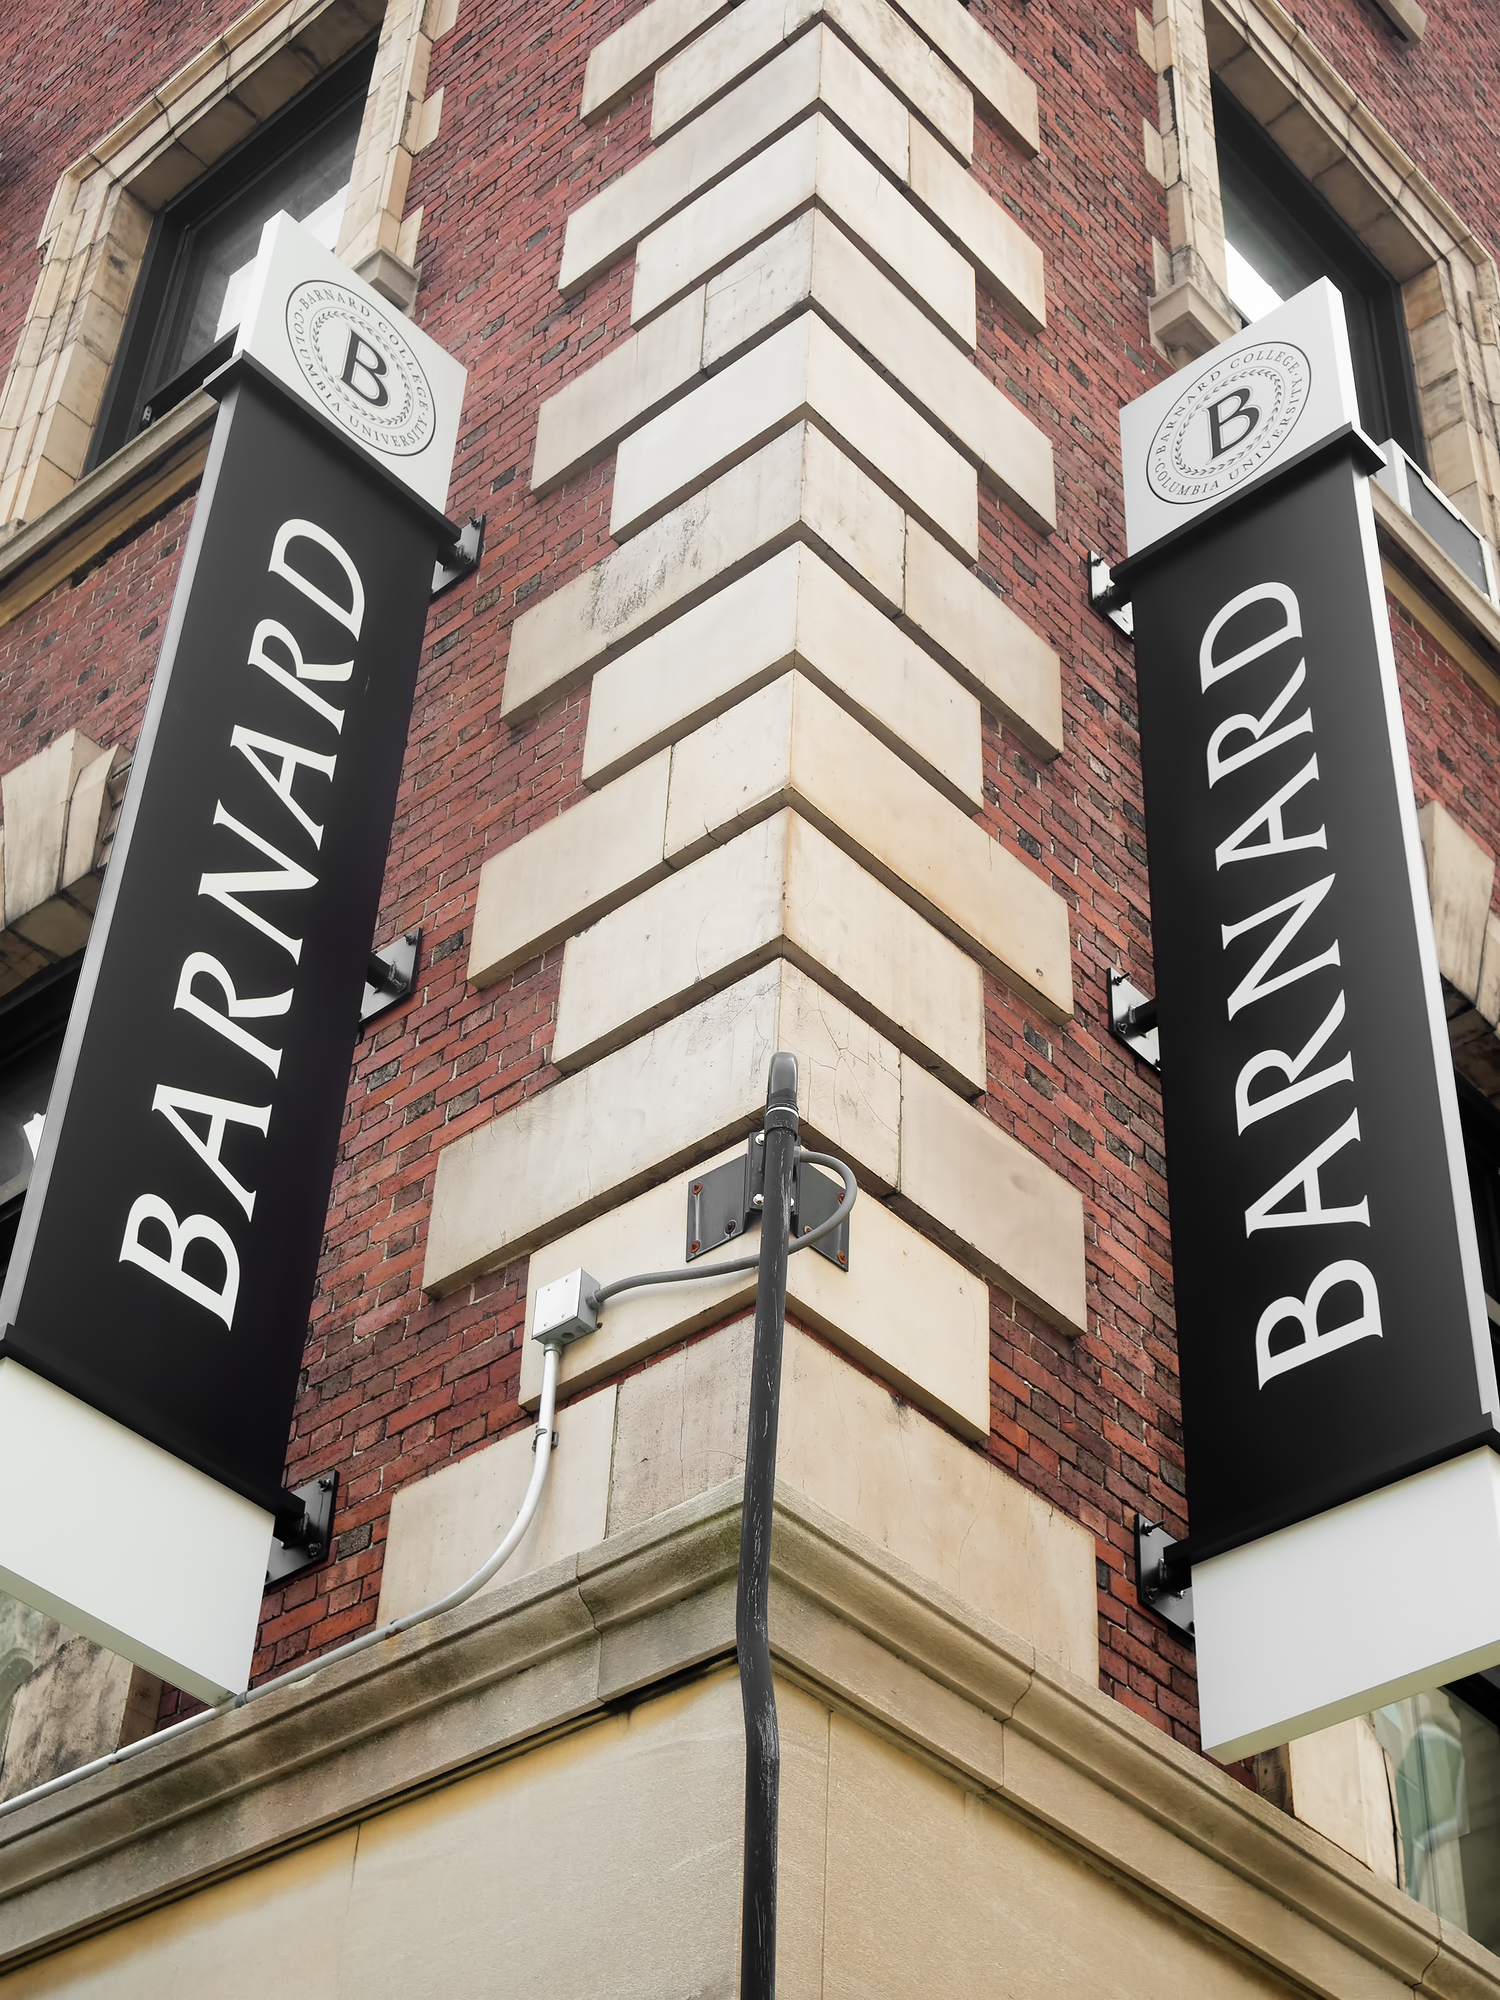 The Barnard liberal arts college in New York City